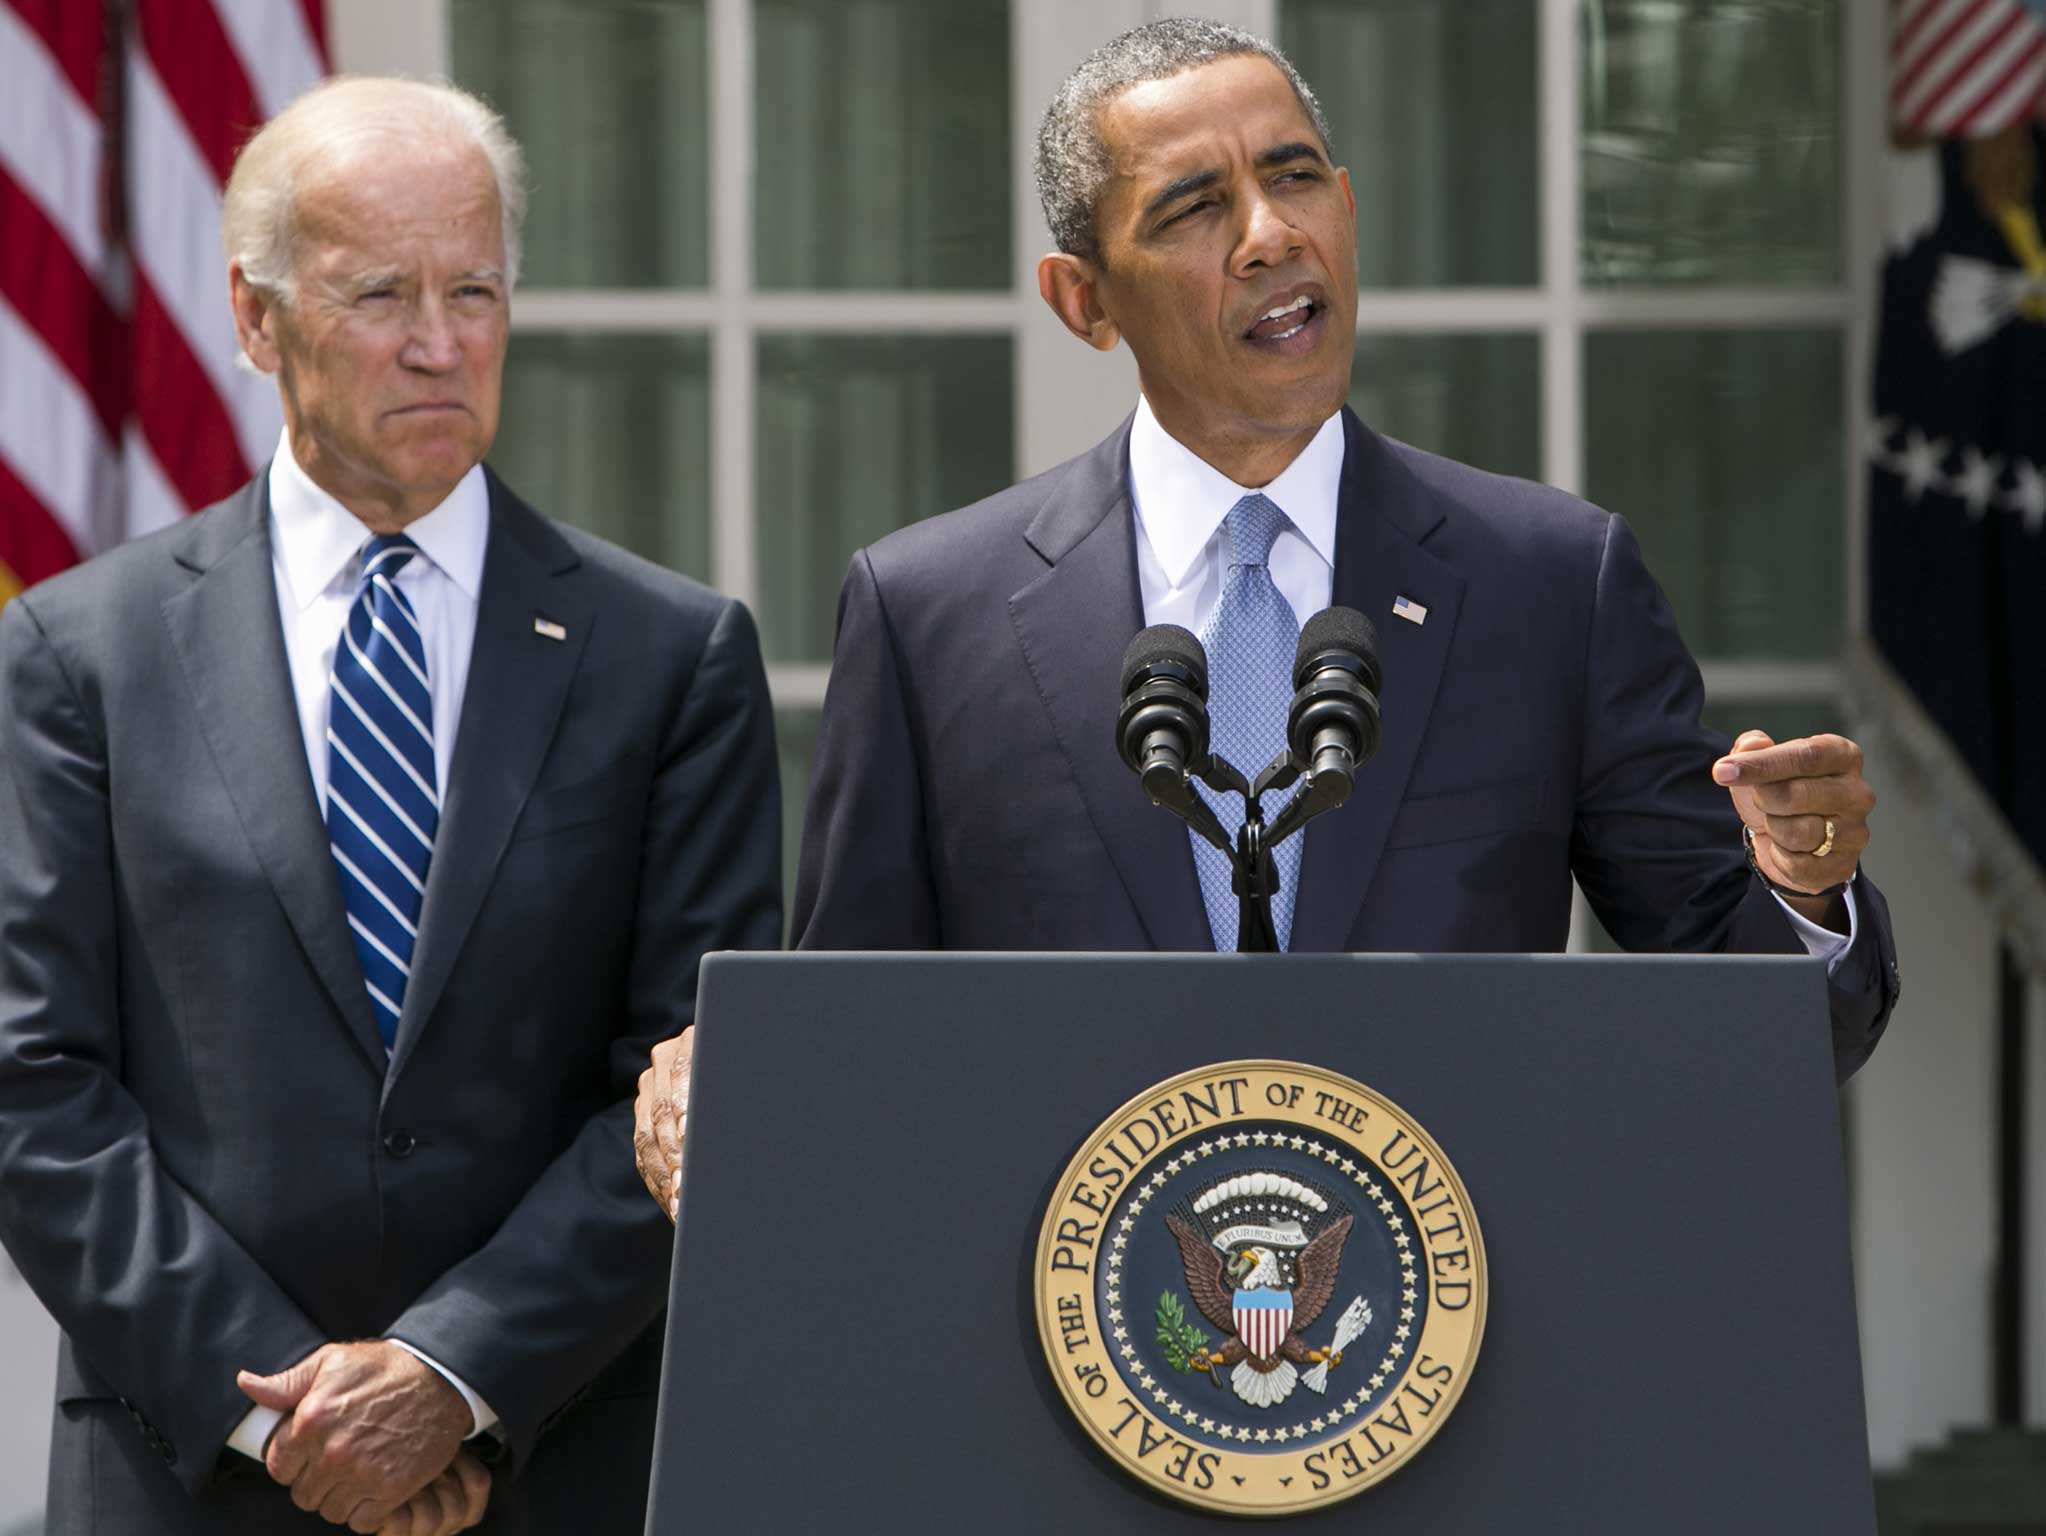 President Barack Obama (right) is joined by Vice President Joe Biden as he delivers a statement on Syria in the Rose Garden